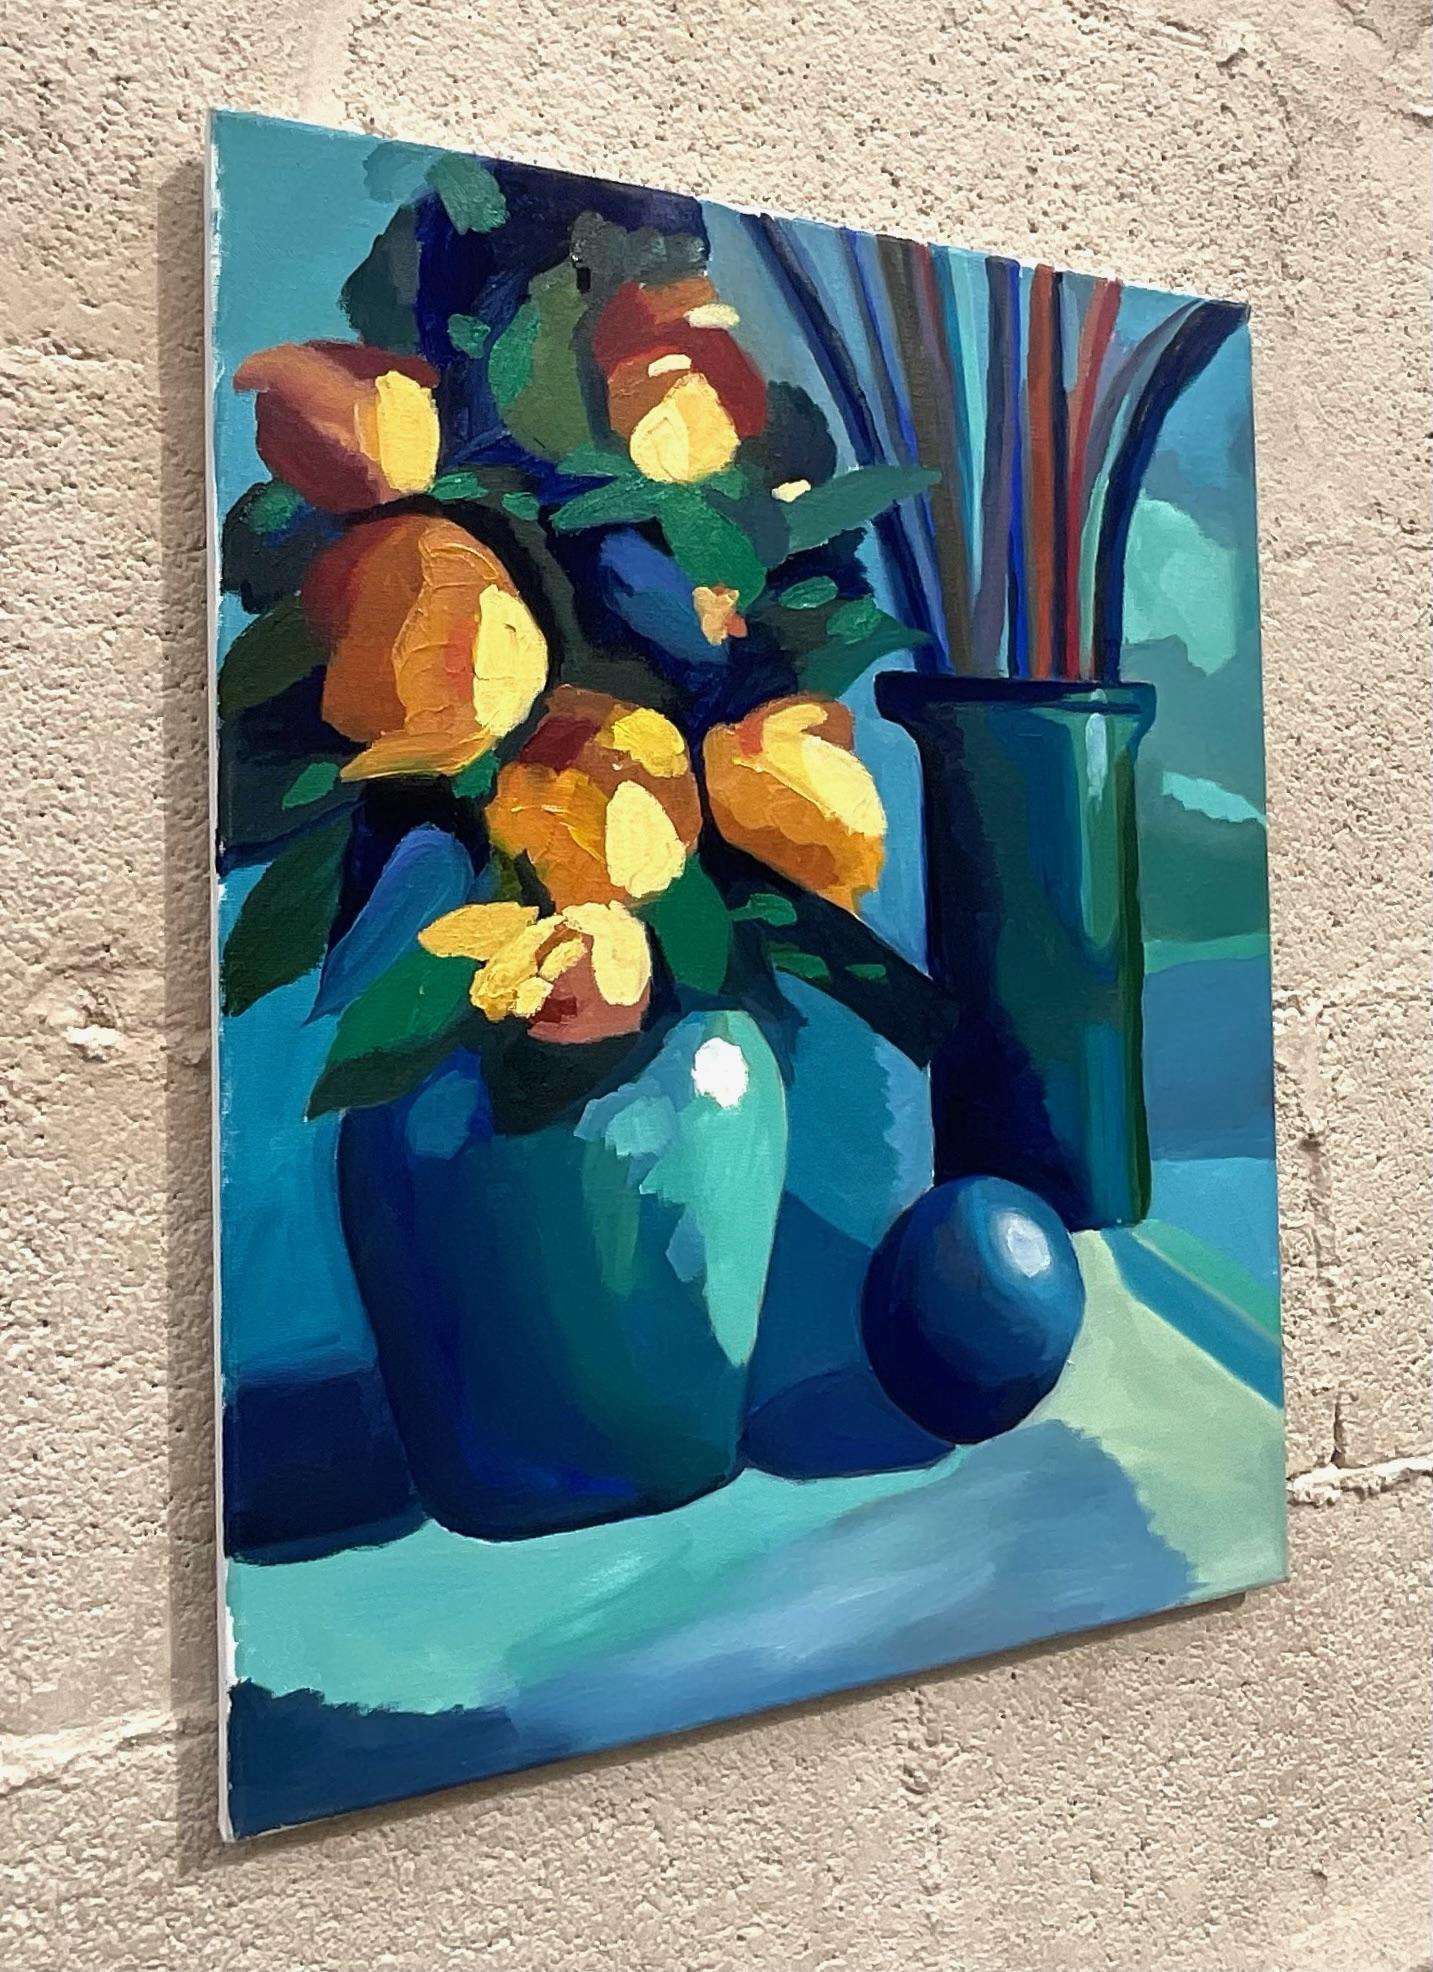 Vintage unsigned blue hue still life featuring yellow flowers with teal vase and beautiful shadow work. The piece has a modern element with almost a monochromatic story featuring several blue hues and the pop of yellow adds a whimsical element.